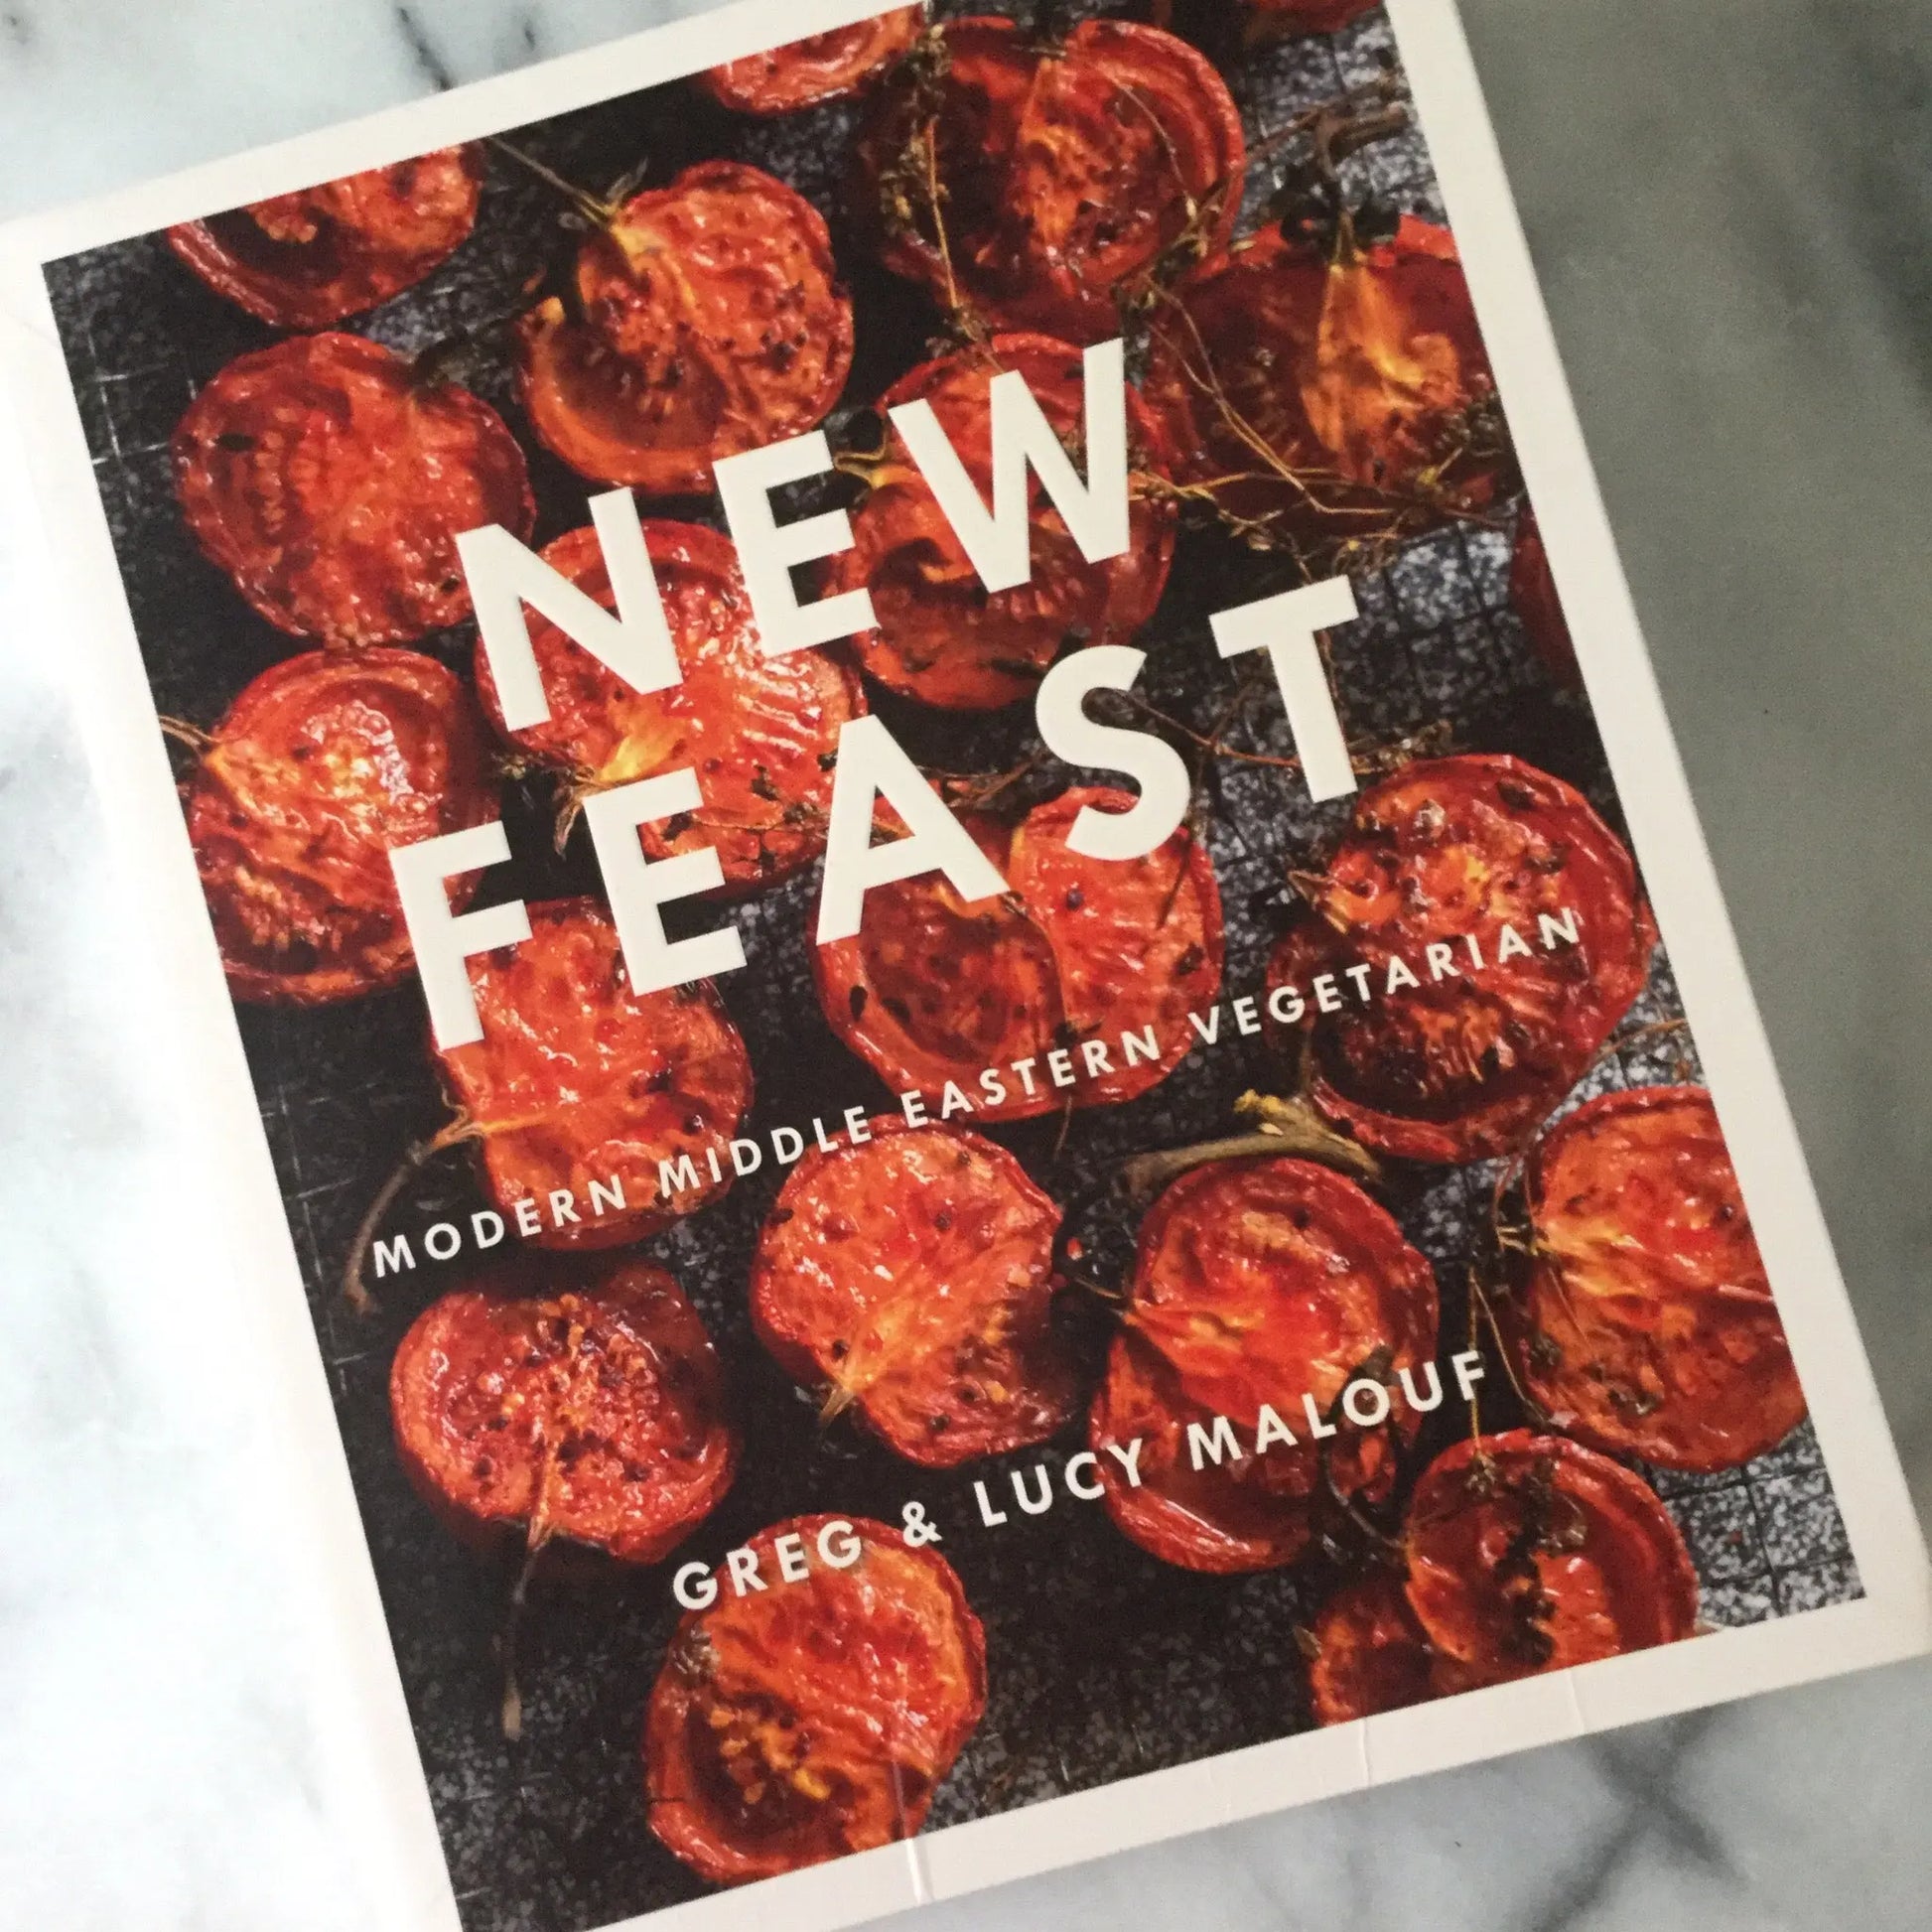 New Feast Greg and Lucy Malouf